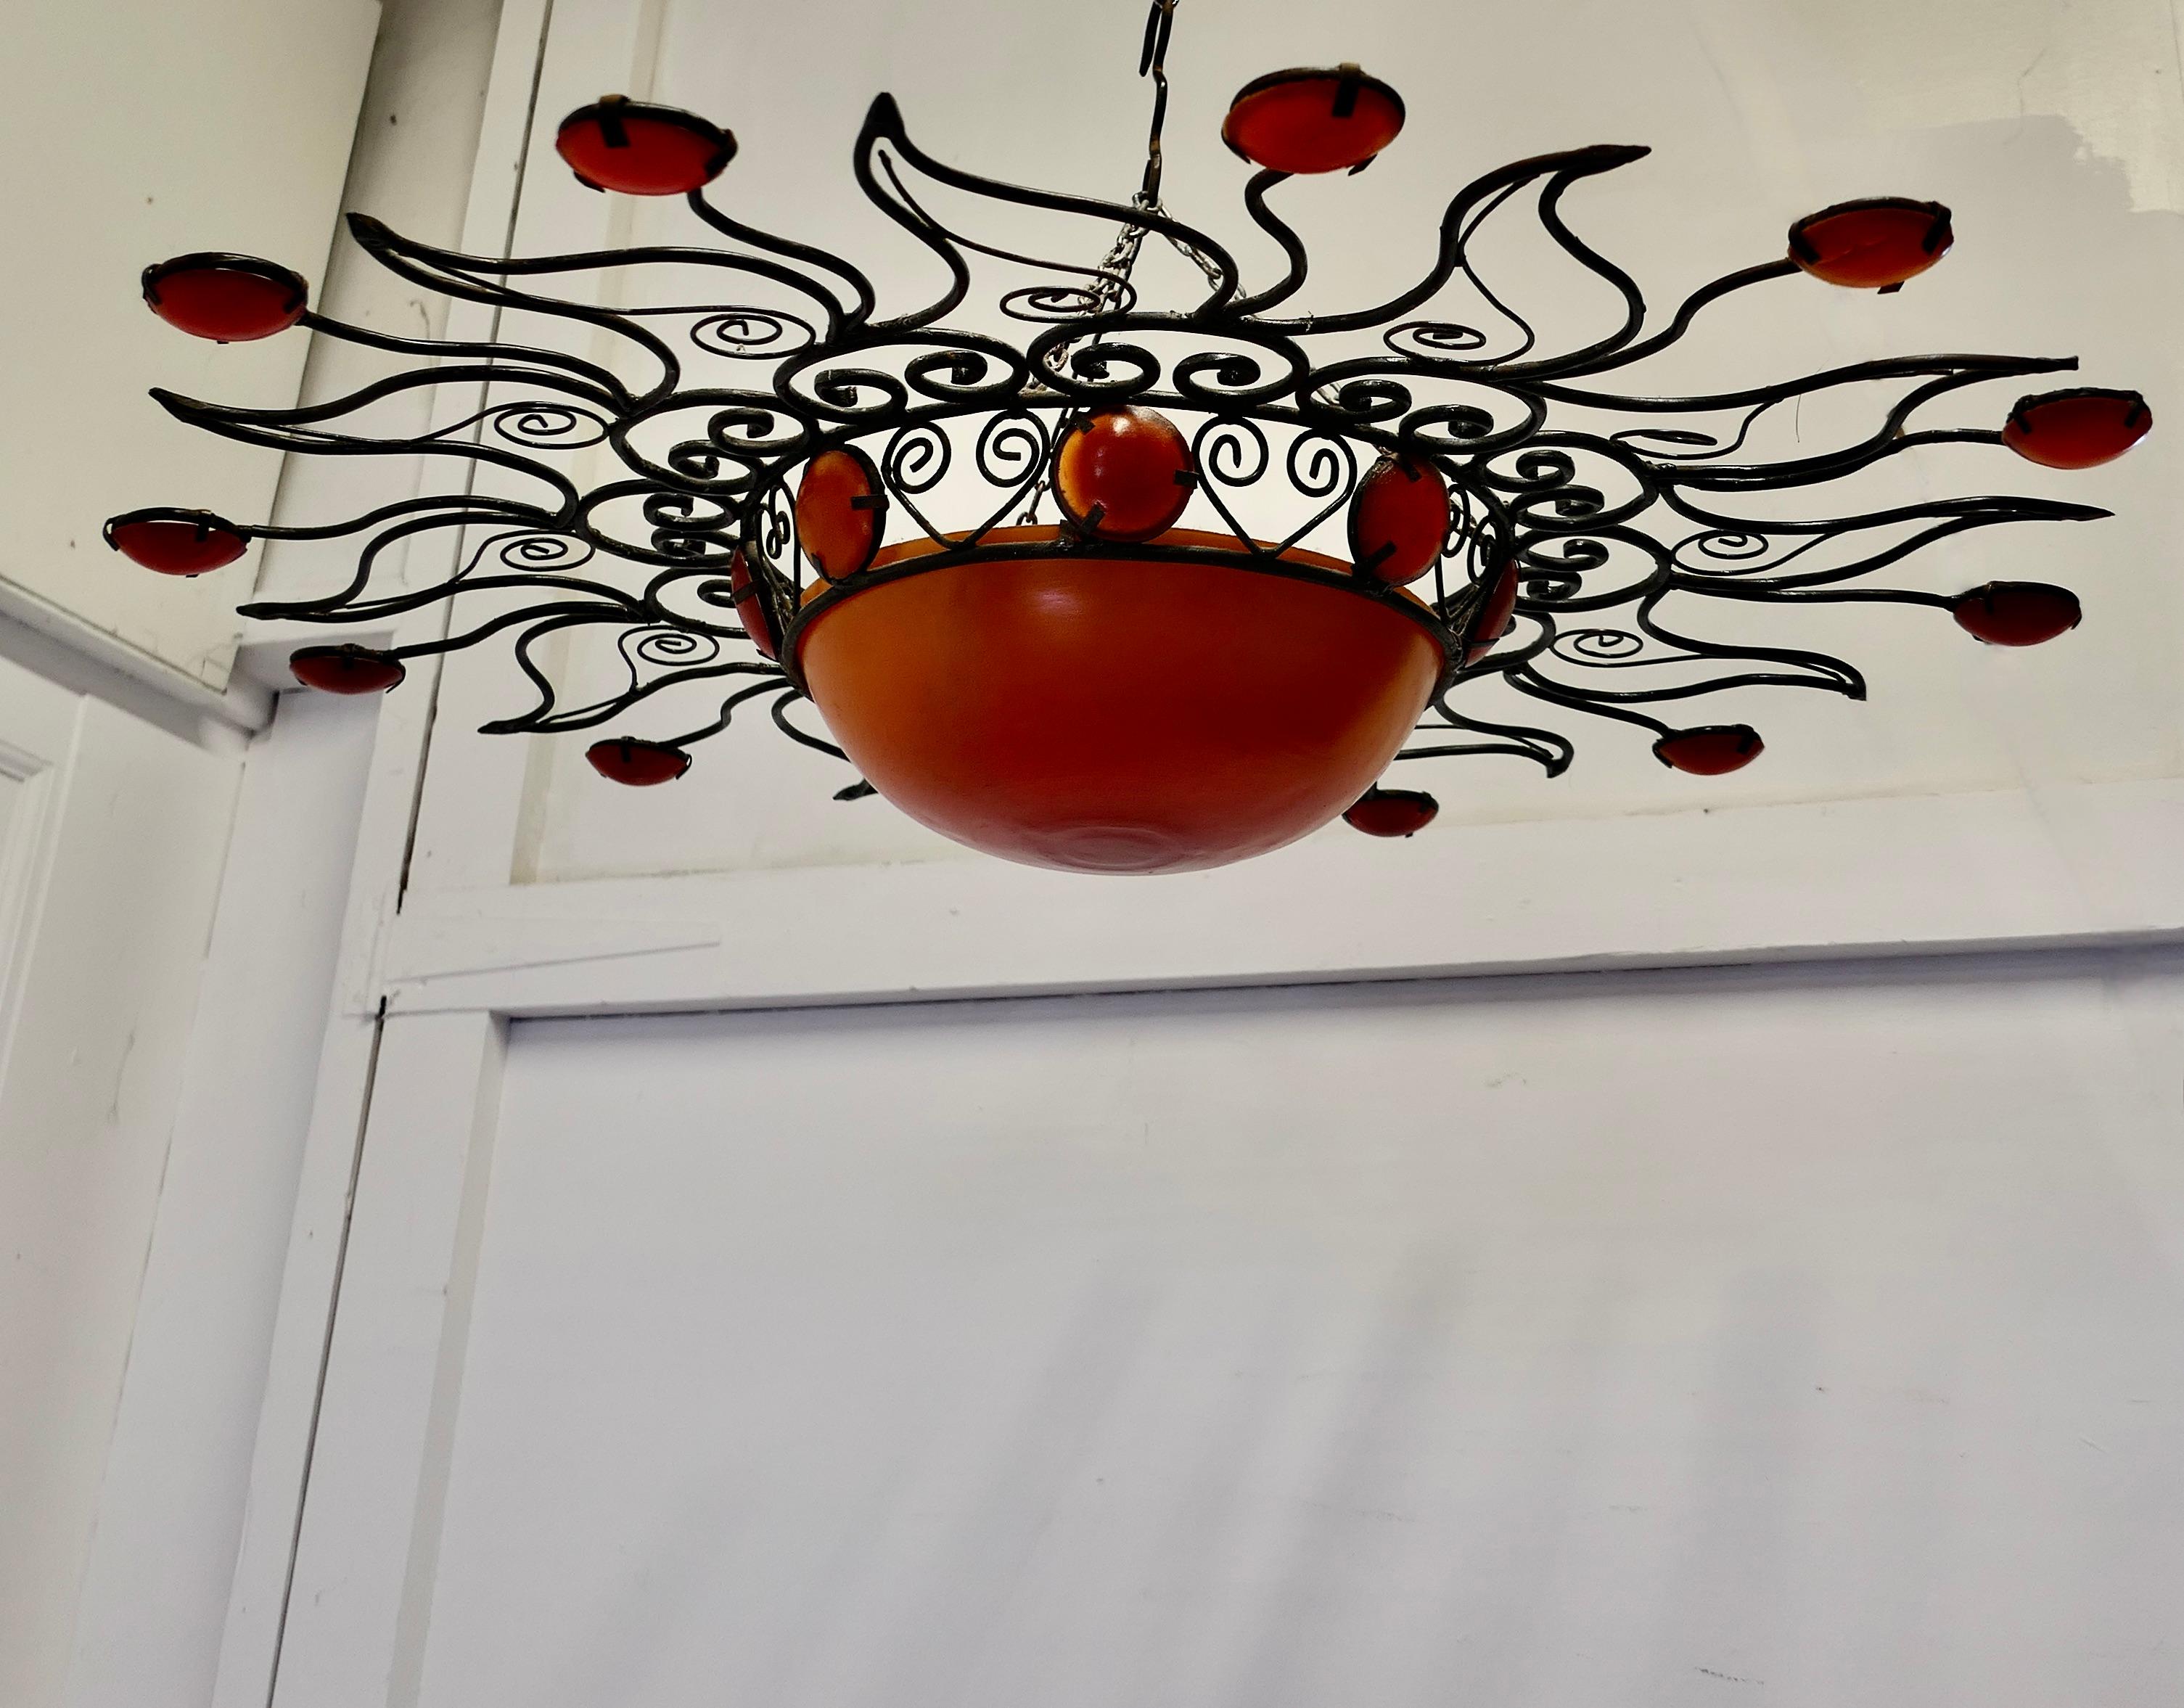 Large 1960s Moroccan Wrought Iron Sun Lamp Shade

A Super piece of Retro Decoration, the wrought Iron shade can be used with a wall light or alternatively this one has been fitted with hanging chains so it can be hung over a ceiling rose
This is a